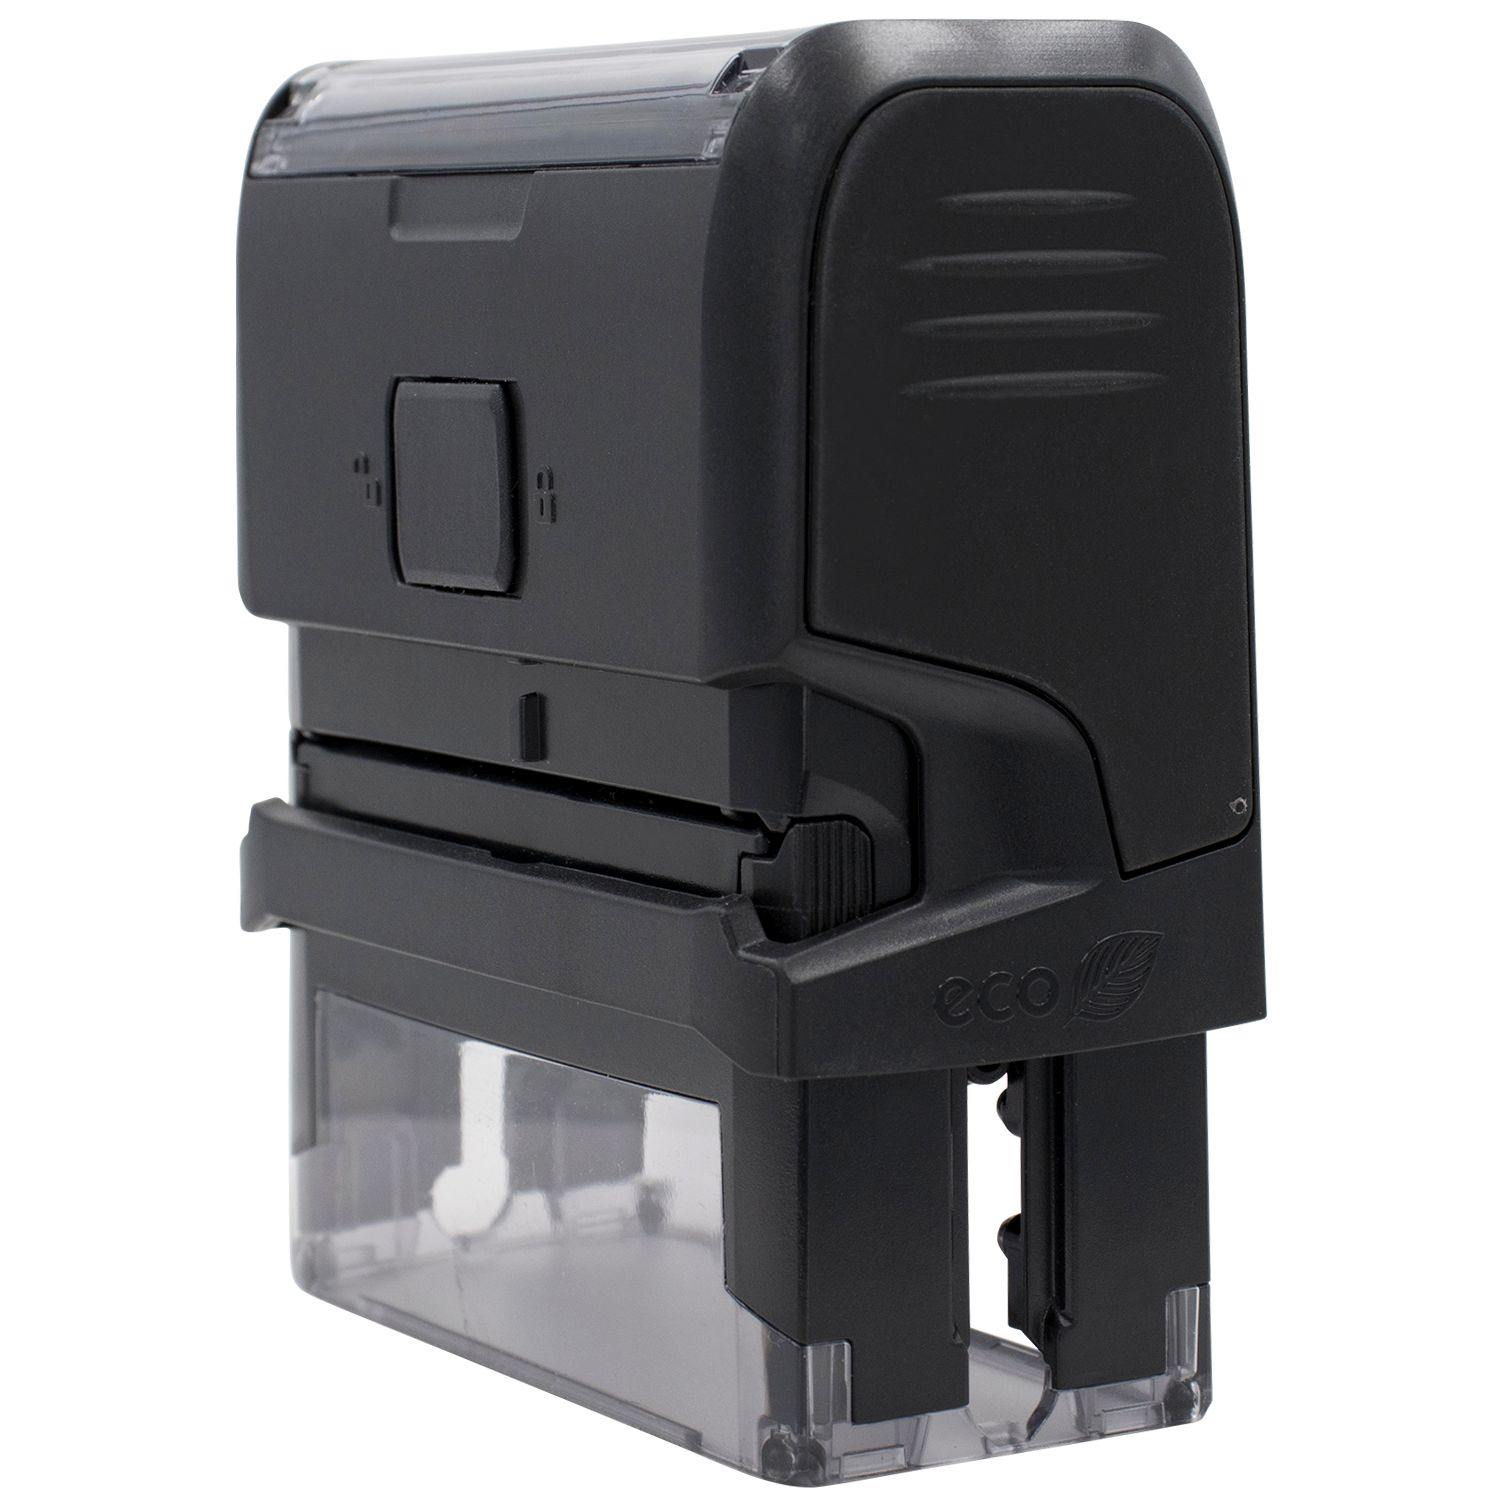 Side View of Large Self-Inking Bold File Stamp at an Angle